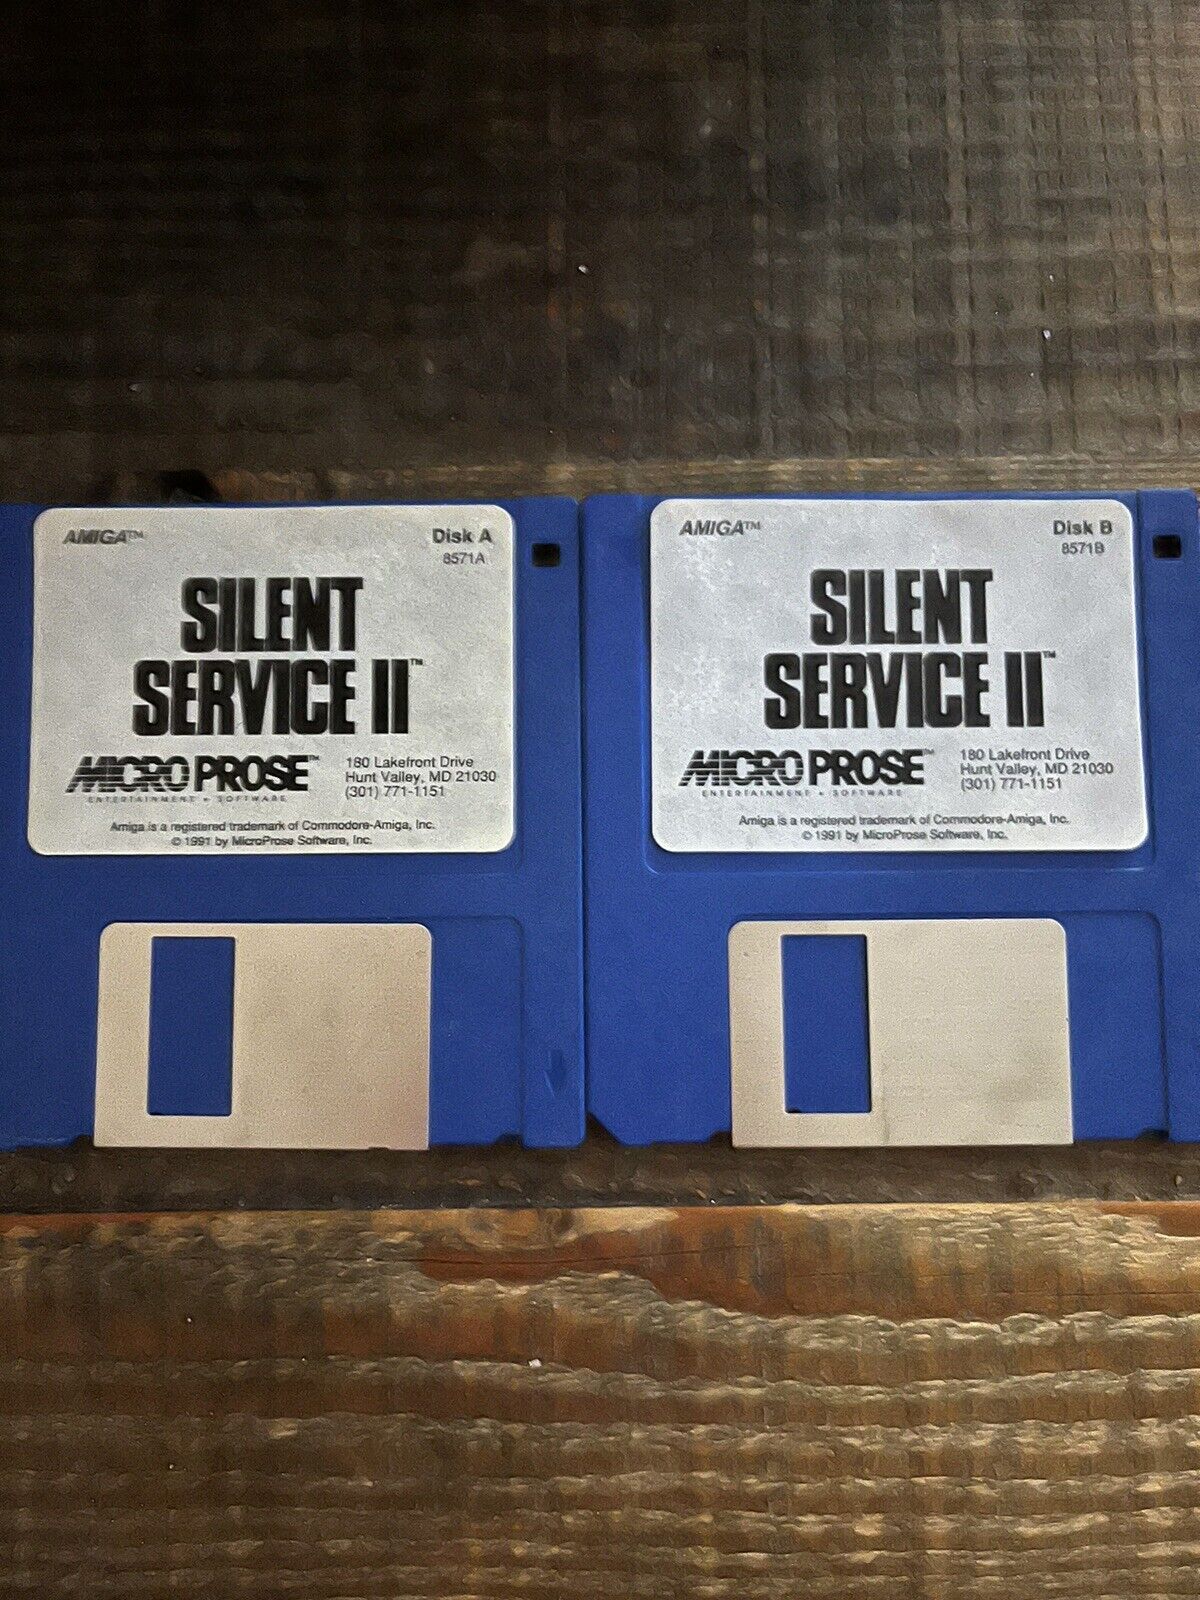 Vintage Commodore Amiga Game Disk- Silent Service II, Microprose Disk A & B